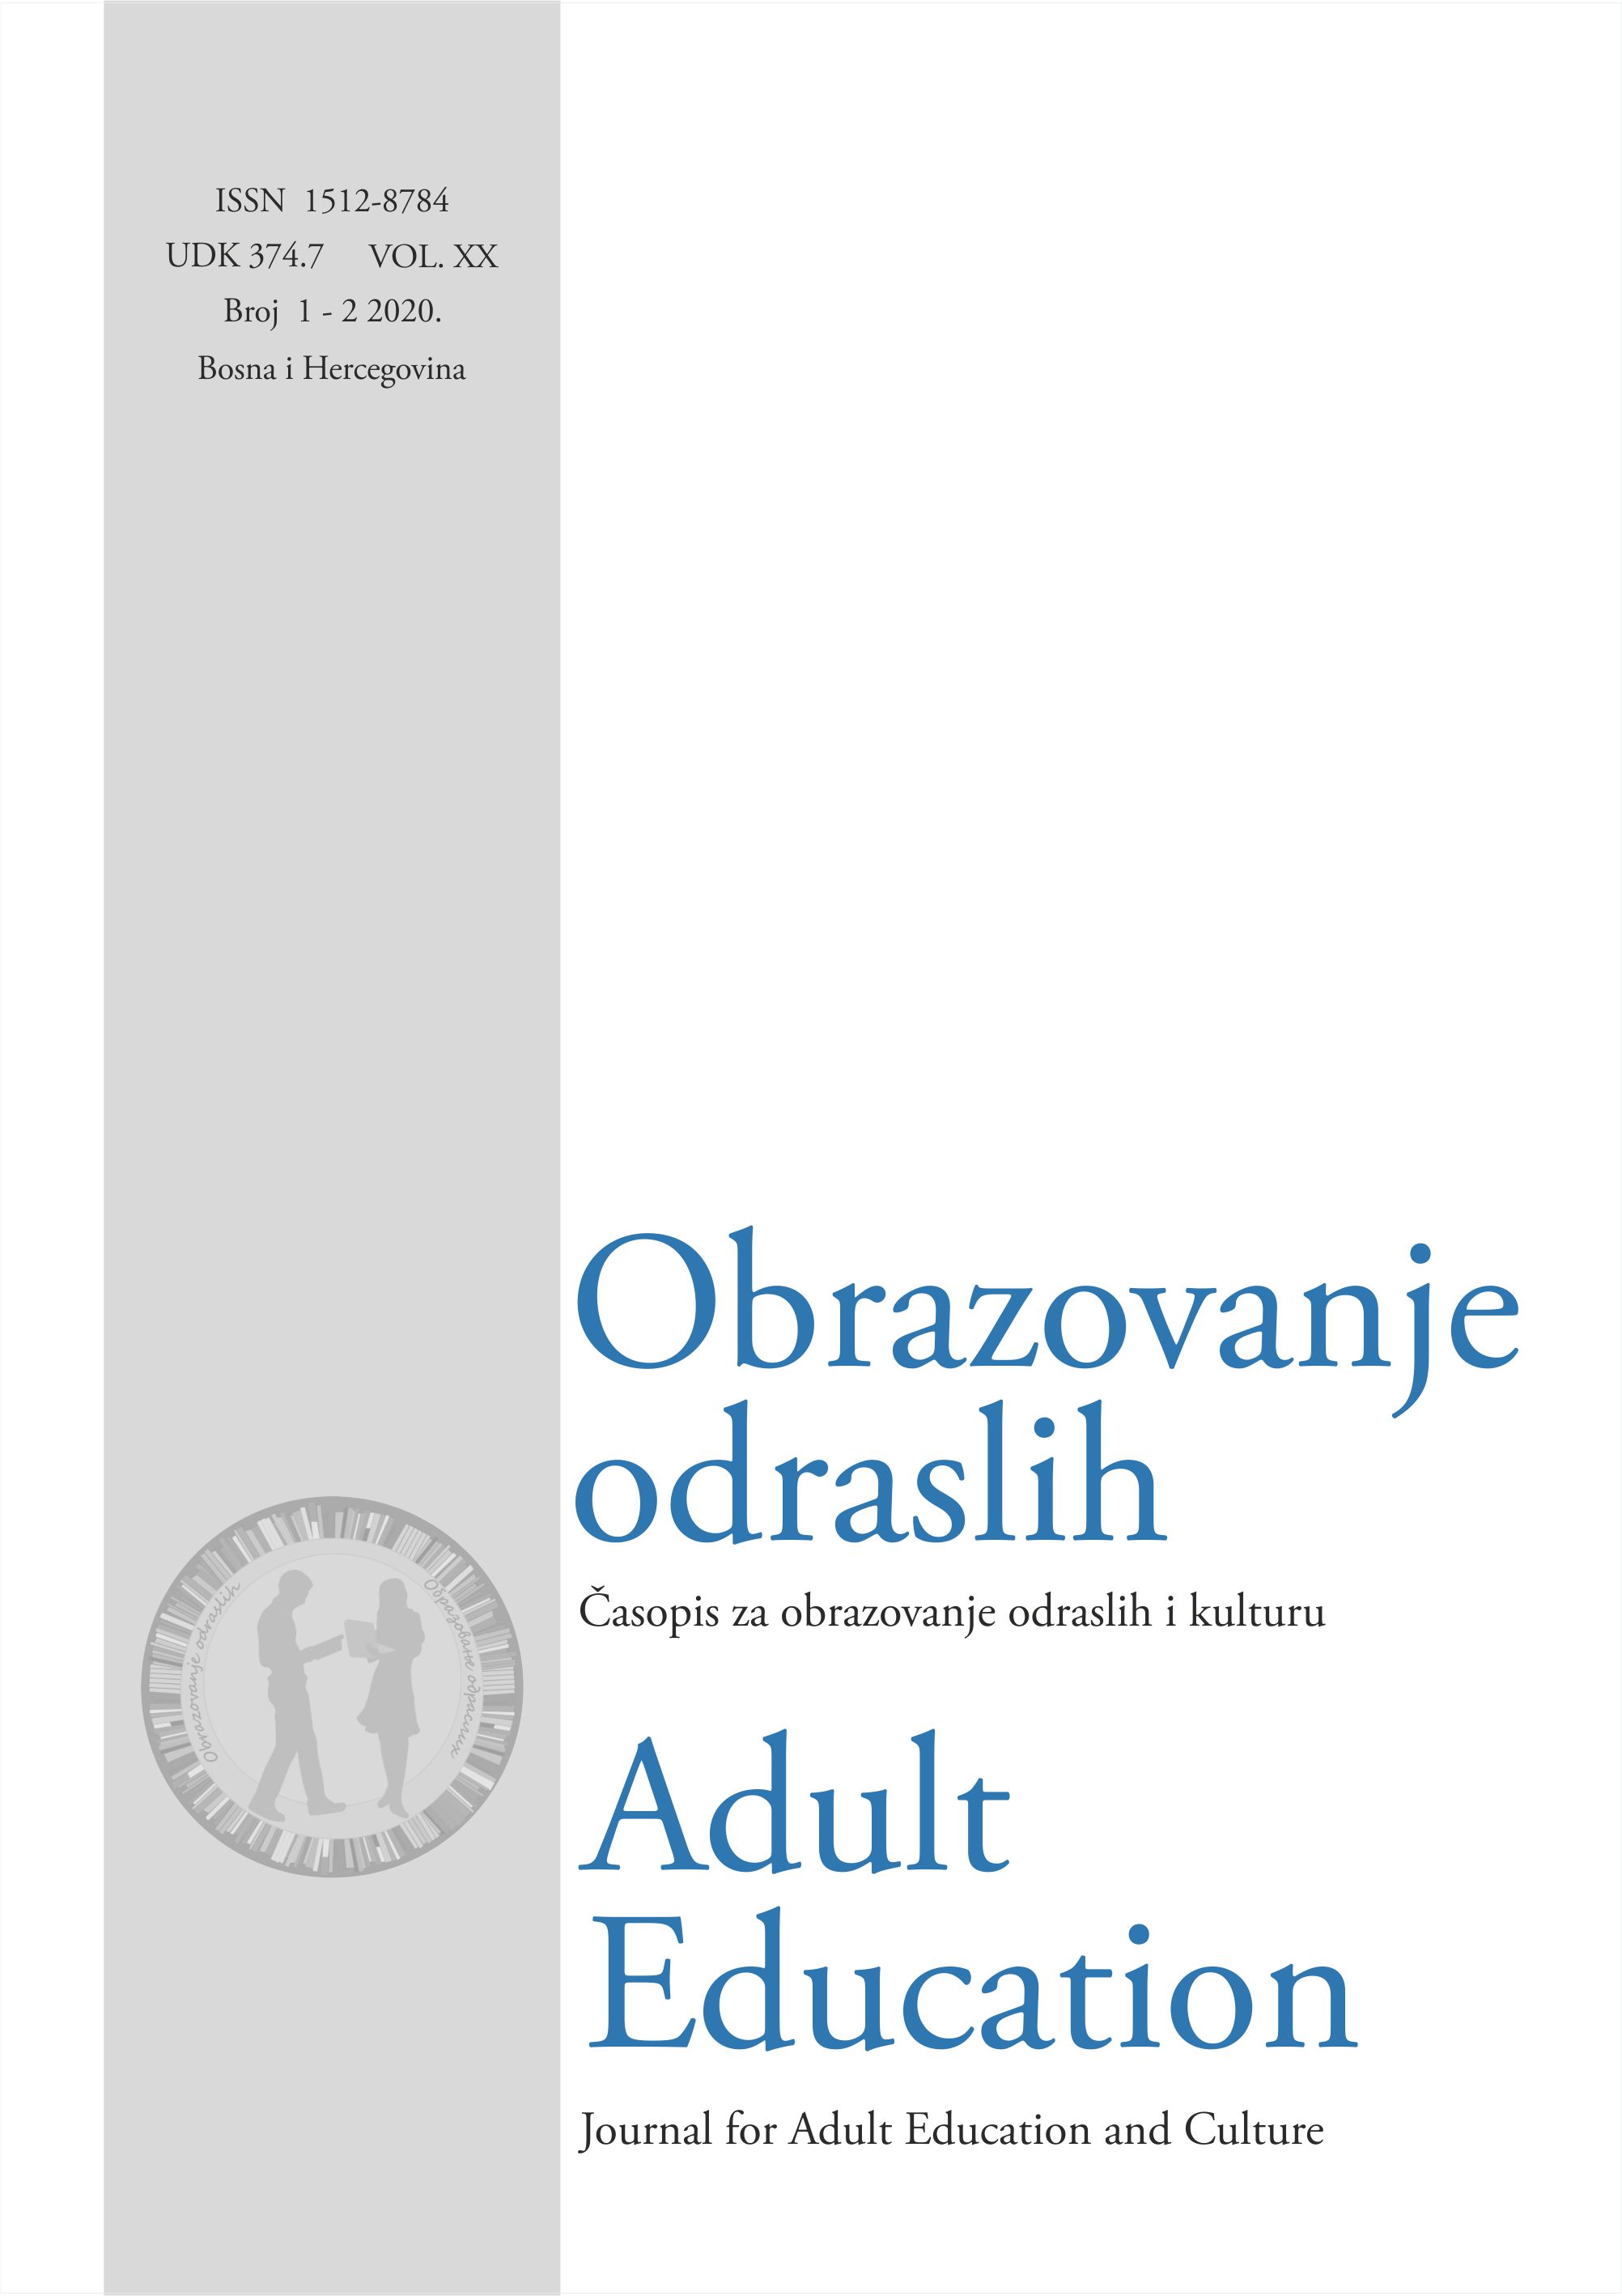 Teacher Training as Contribution to Strengthening Capacities for Development of Elementary Adult Education in Bosnia and Herzegovina Cover Image